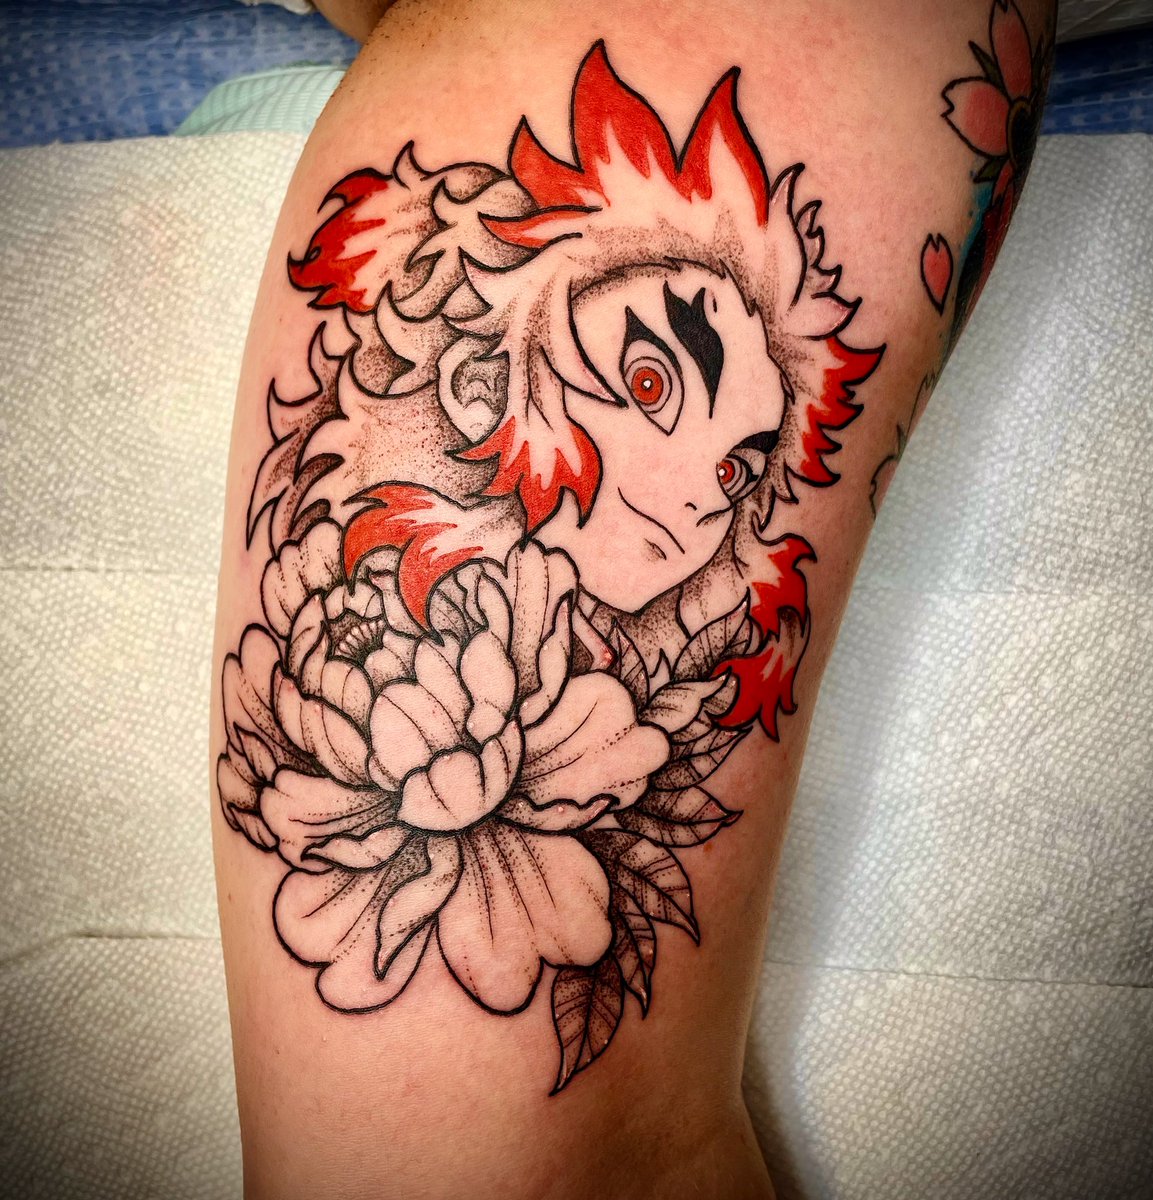 19 of the Best Anime Tattoos to Feed Your Dweeb Heart — See Photos